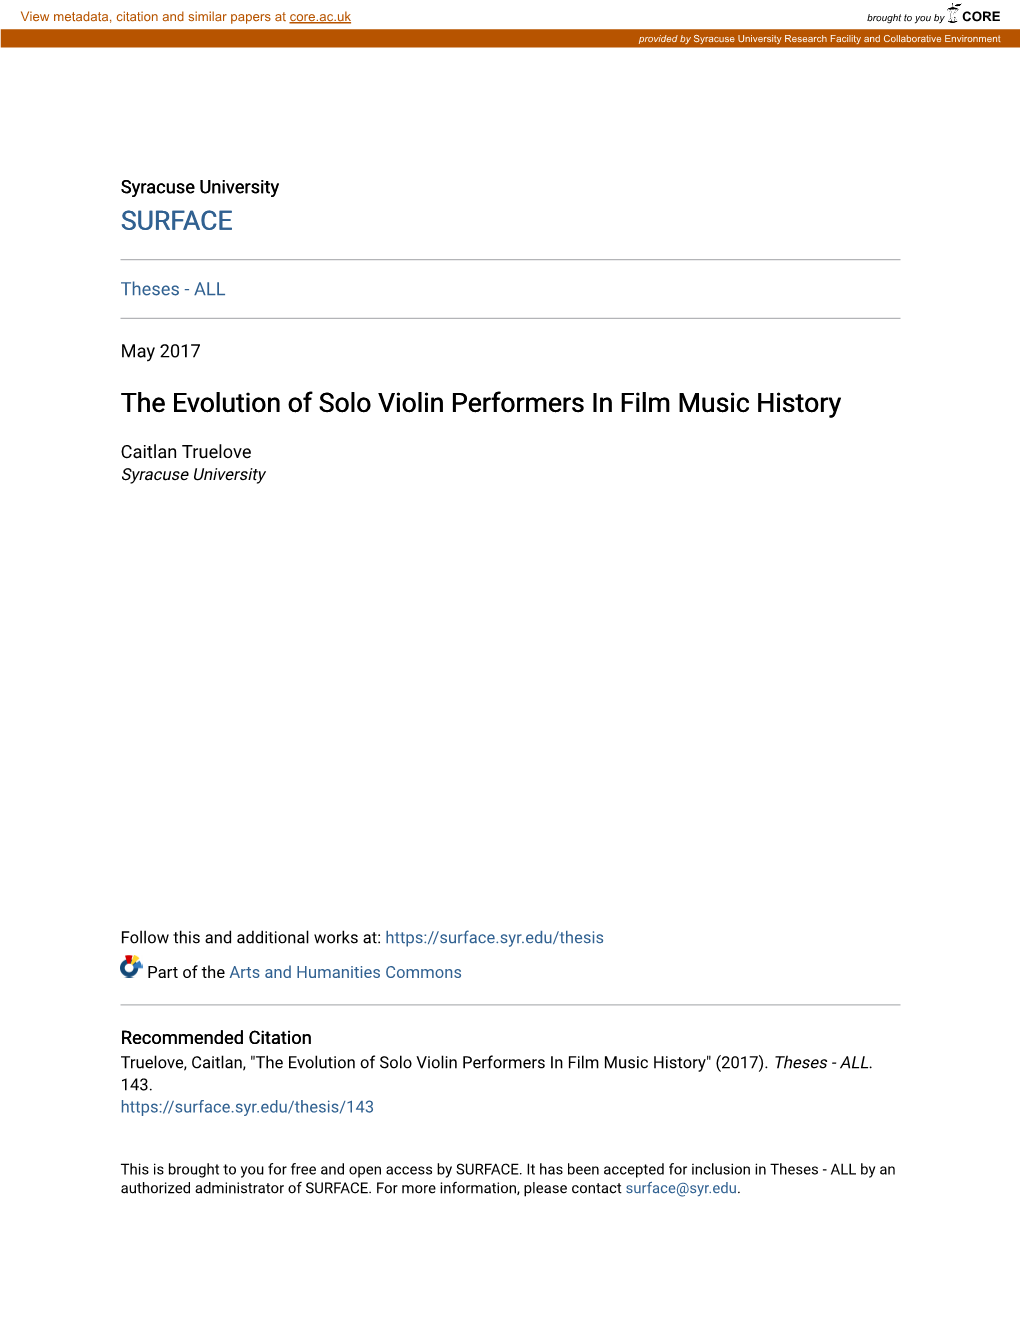 The Evolution of Solo Violin Performers in Film Music History